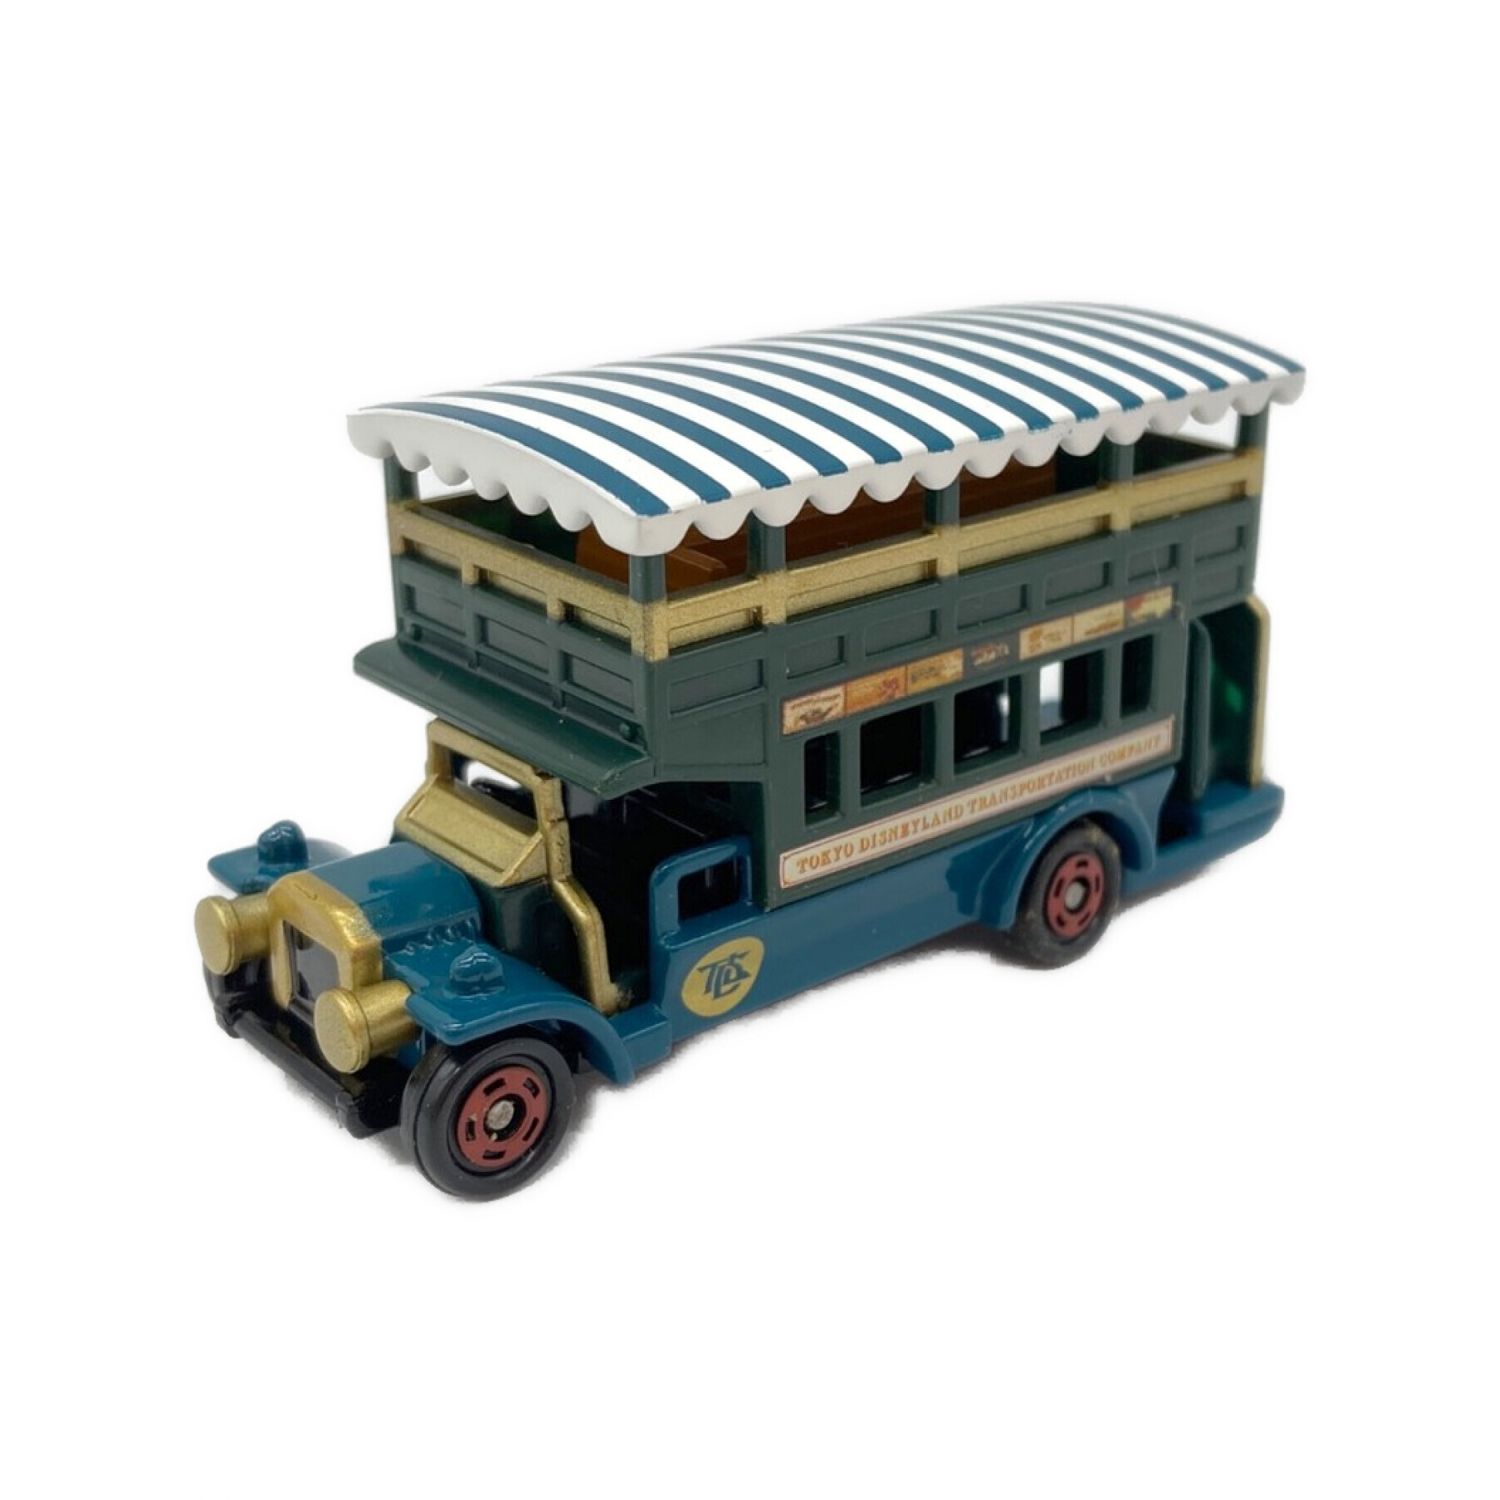 TOMY (トミー) トミカ Disney Vehicle Collection 1/102 オムニバス